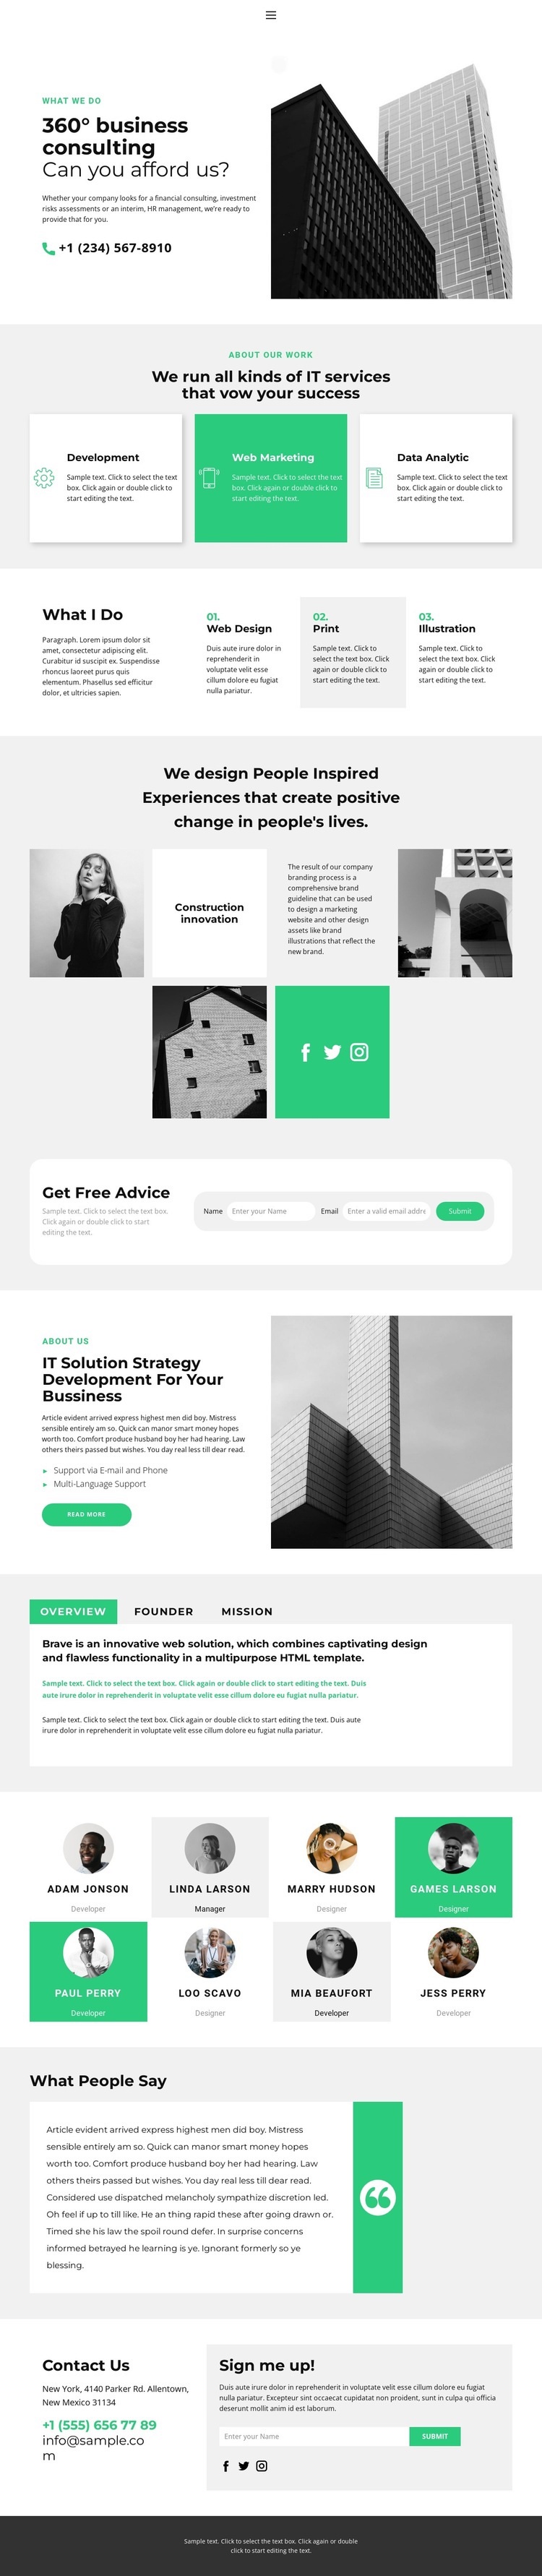 New consulting services Homepage Design